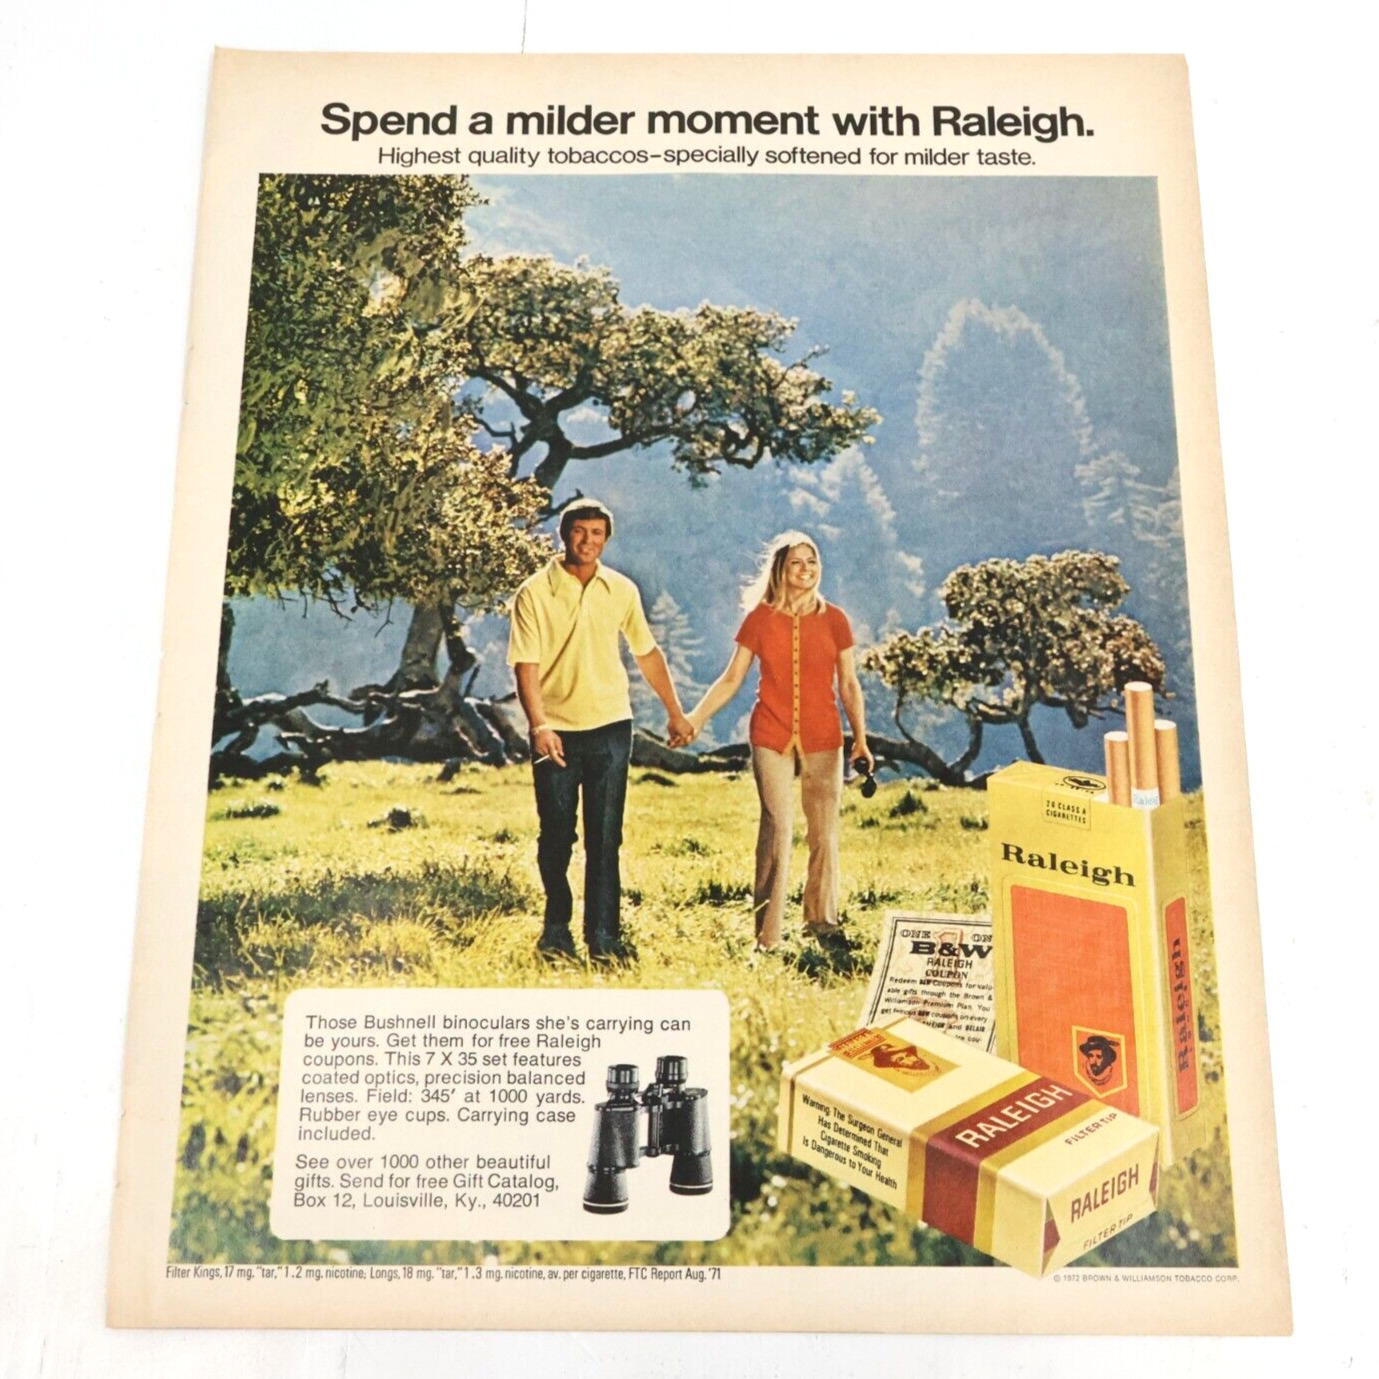 1972 Raleigh Filter Tip Cigarettes Spend A Milder Moment Print Ad 10.5x13.5